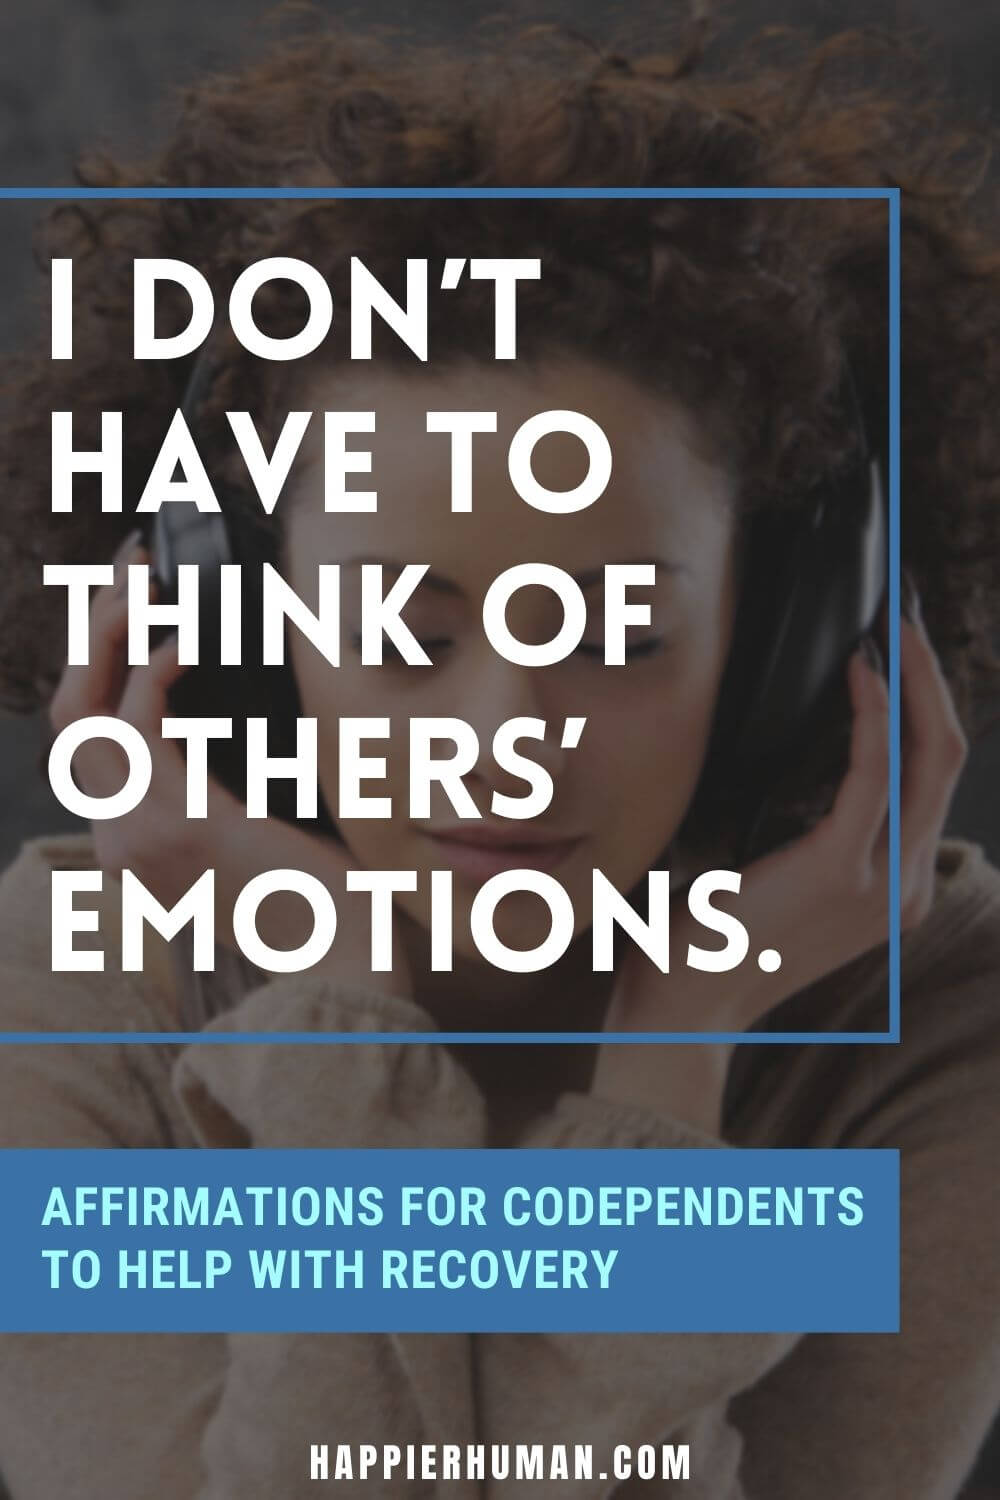 Affirmations for Codependents - I don’t have to think of others’ emotions. | codependent no more affirmations | coda affirmations pdf | coda affirmations book